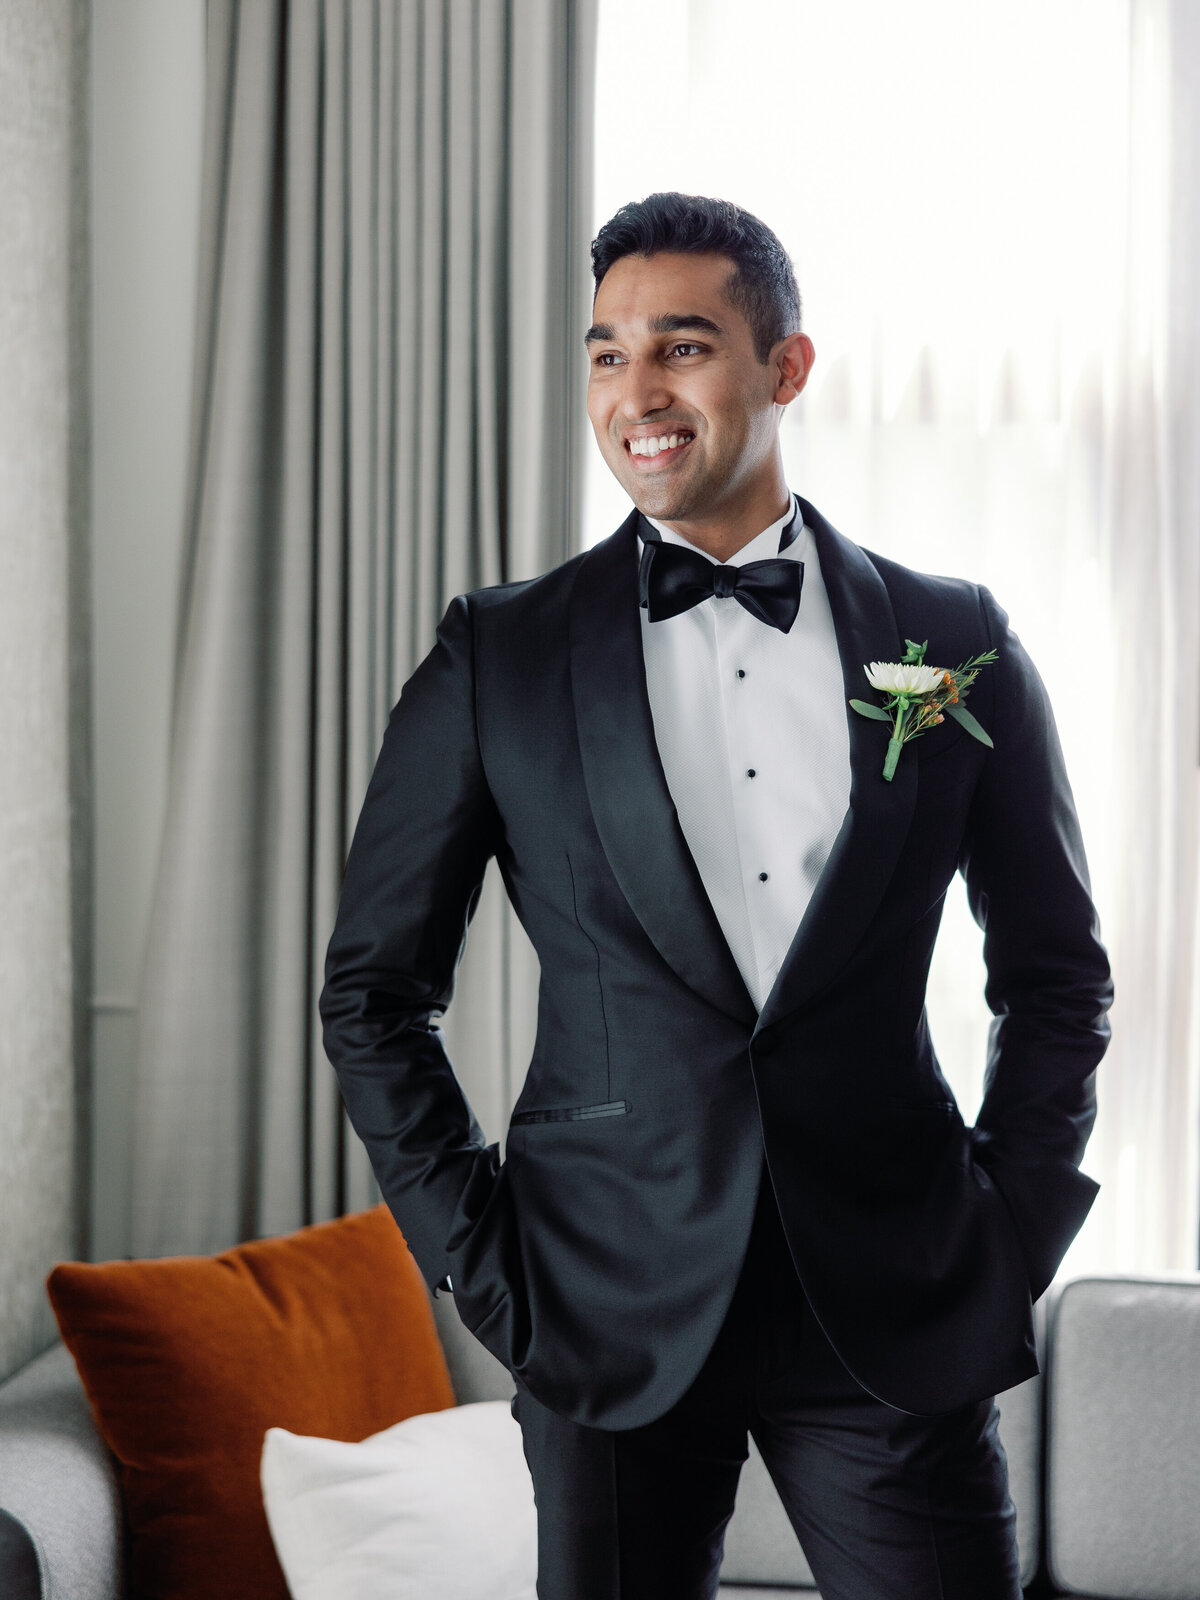 A groom portrait as he stands with his hands in his pockets